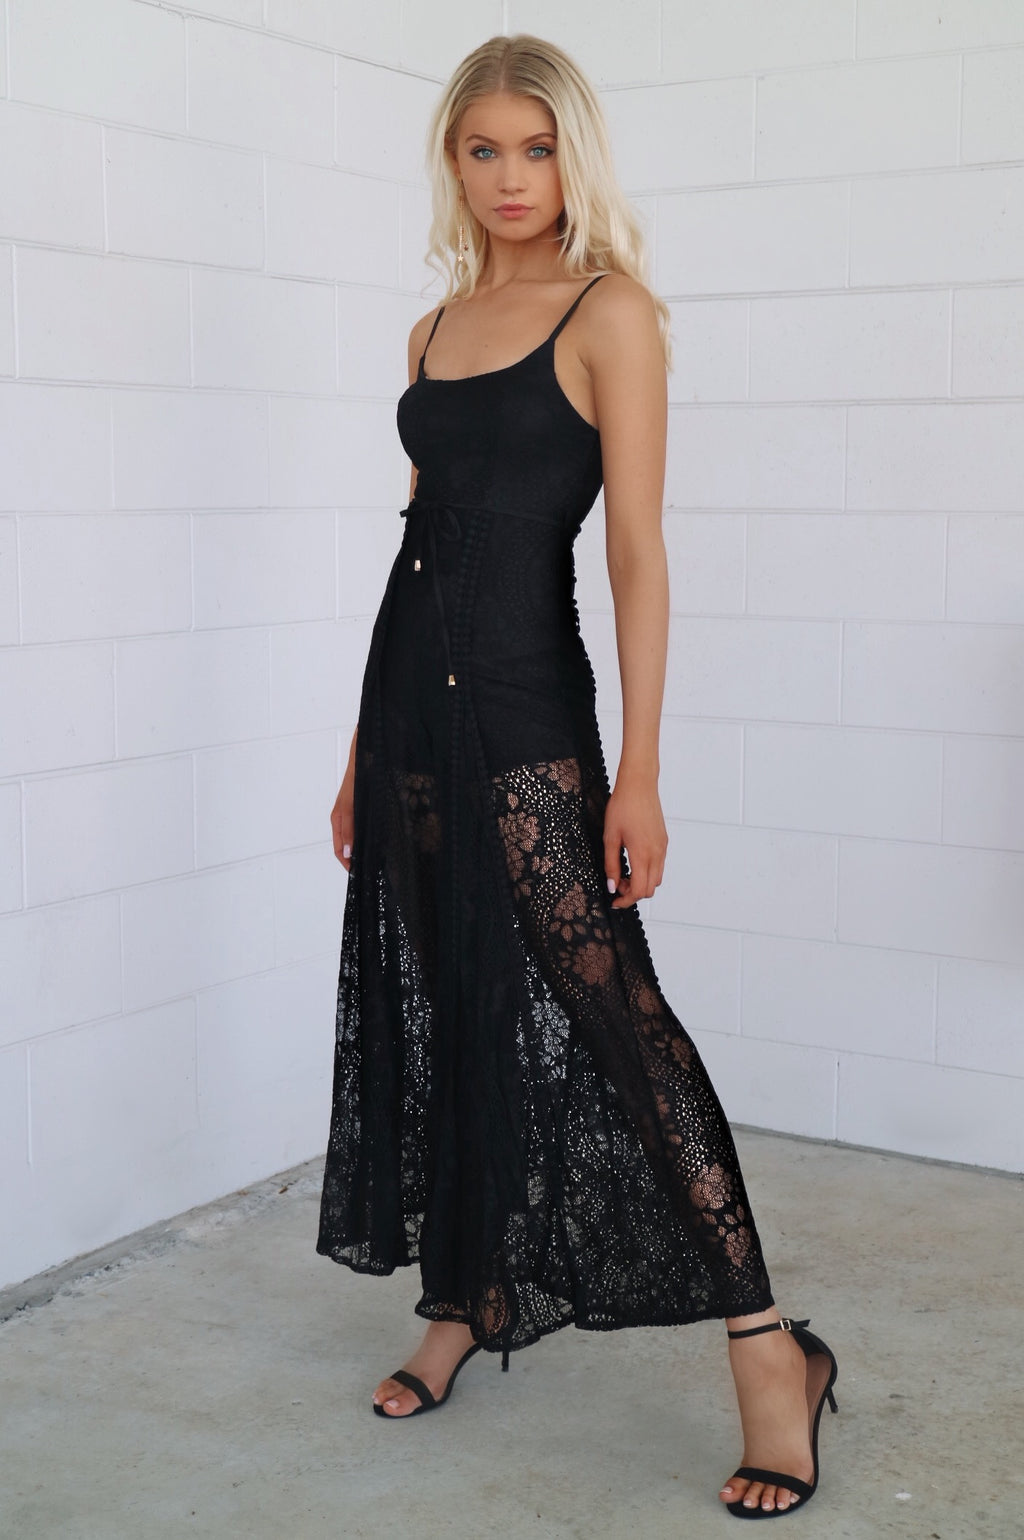 Leticia Lace Jumpsuit - Black - Runway Goddess